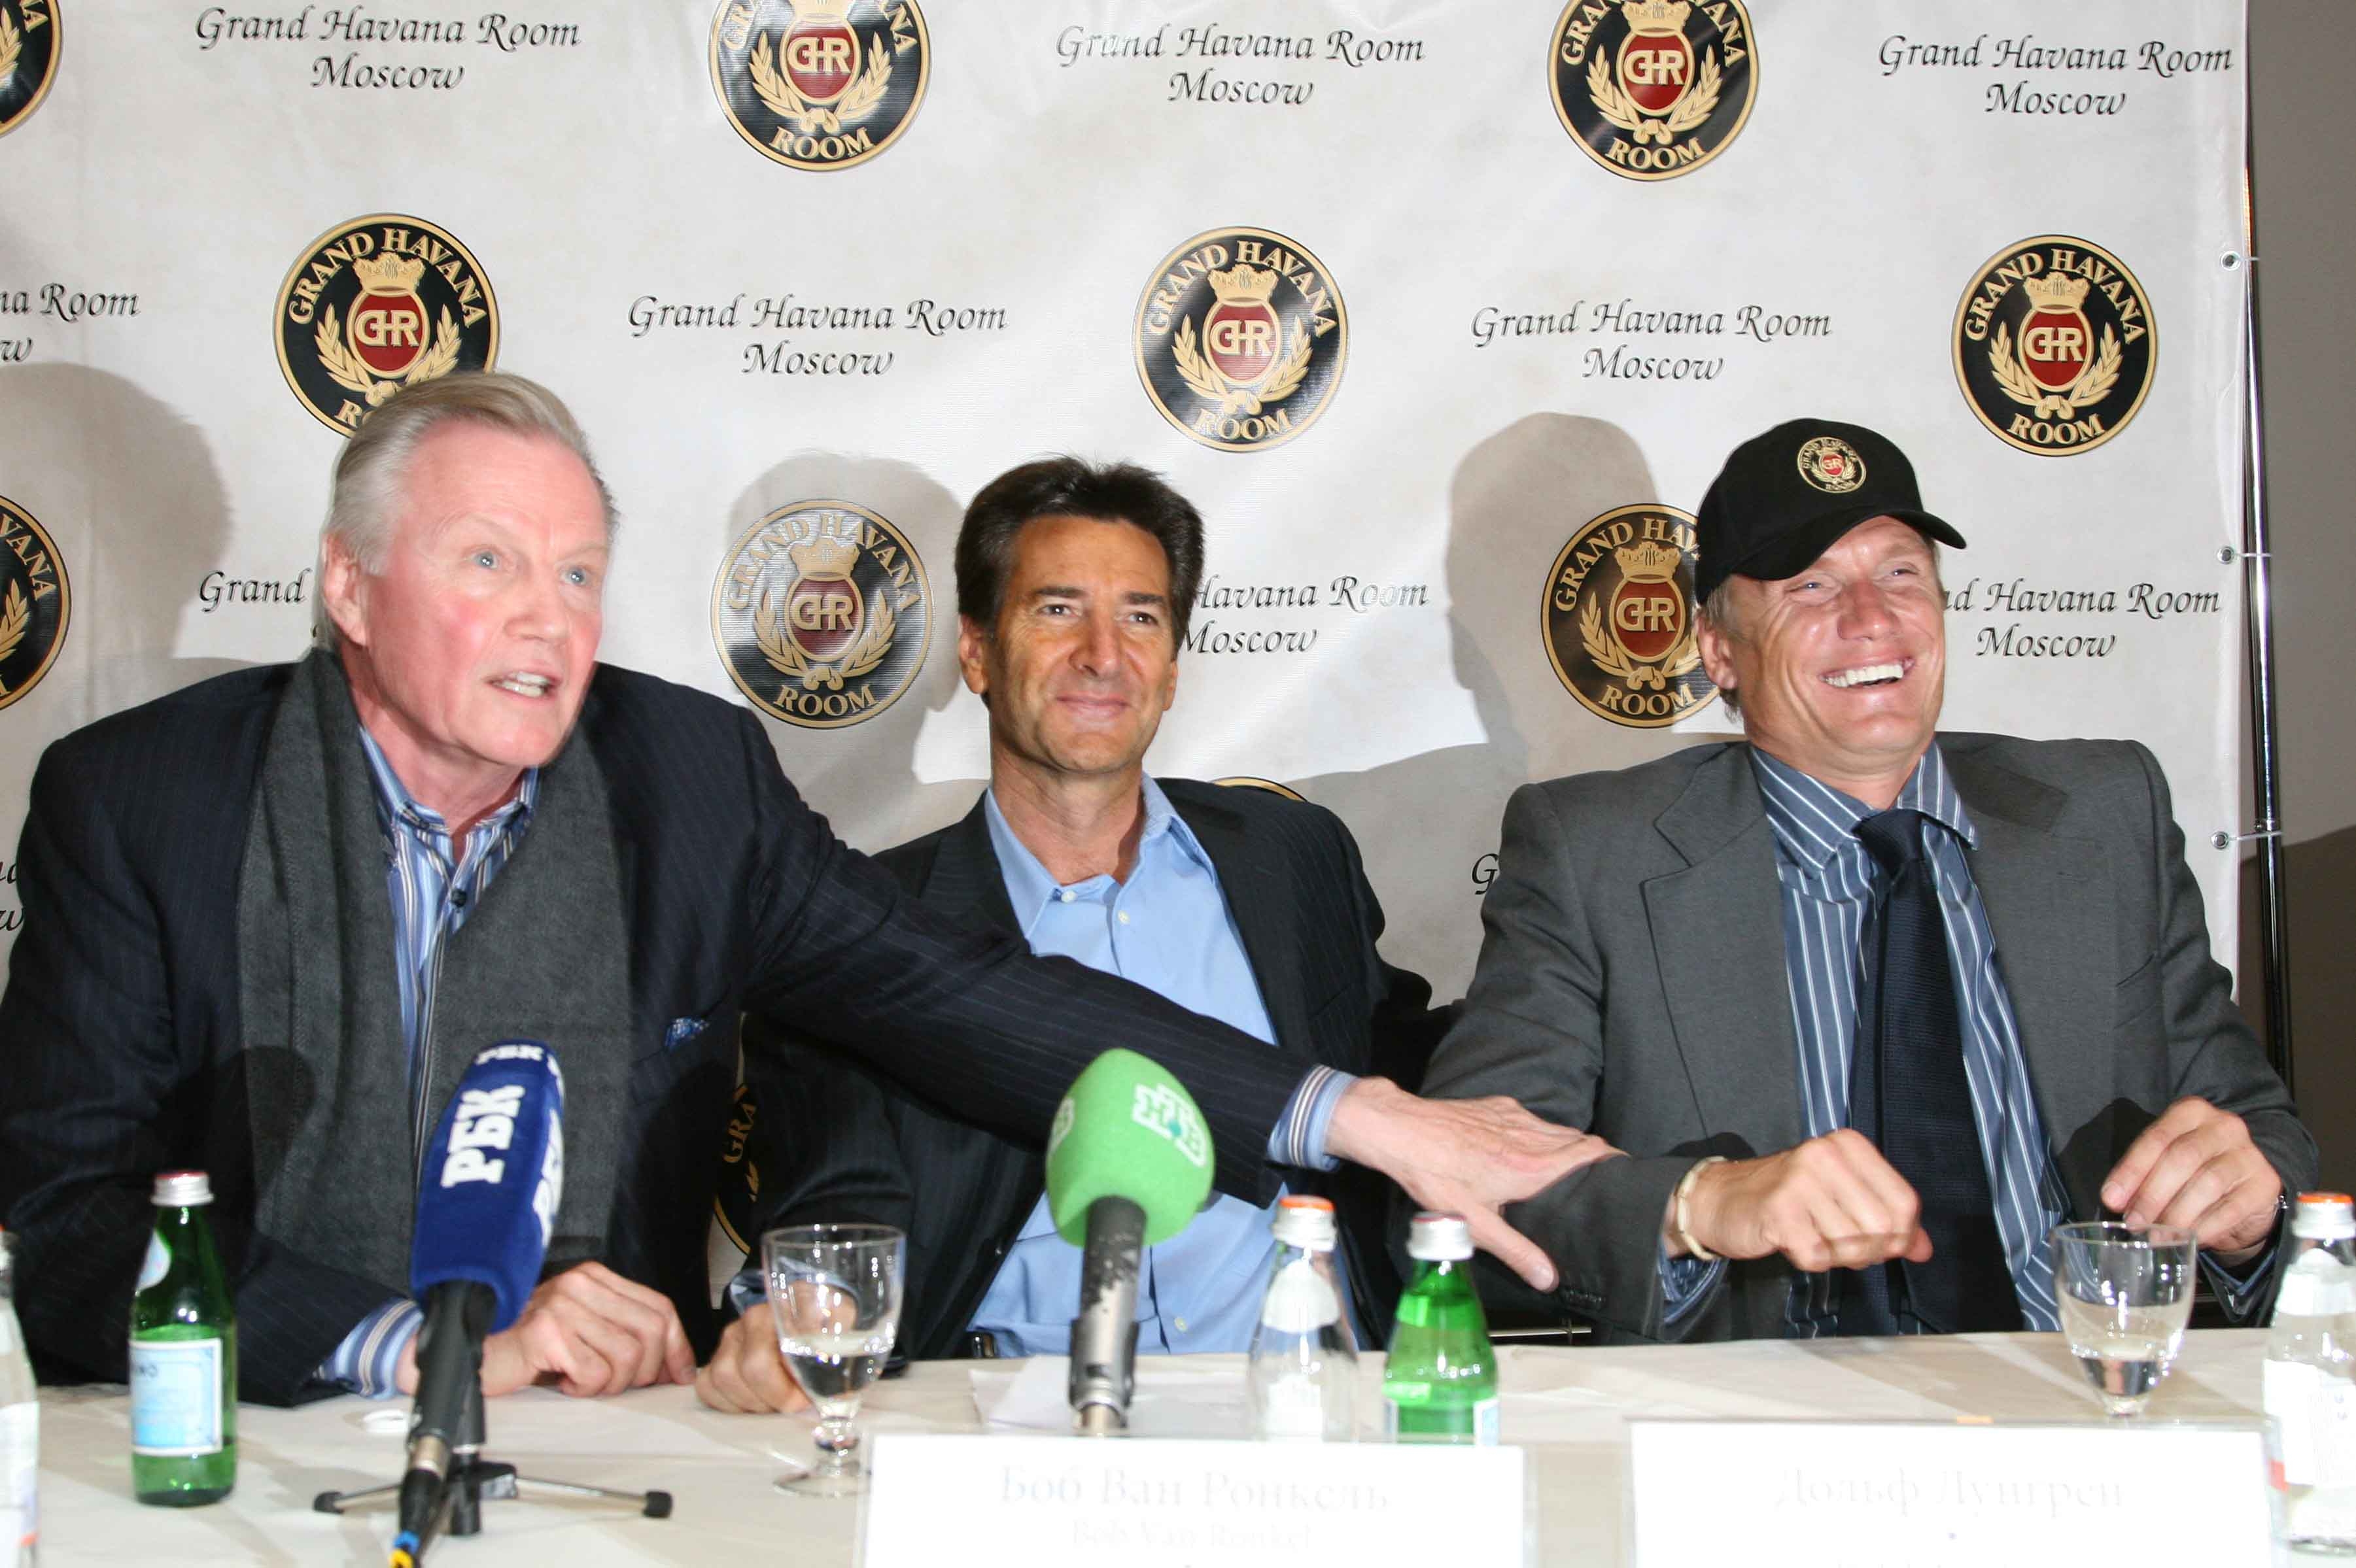 Bob Van Ronkel, Jon Voight and Dolph Lundgren at Grand Havana Room Moscow press conference in March, 2008.